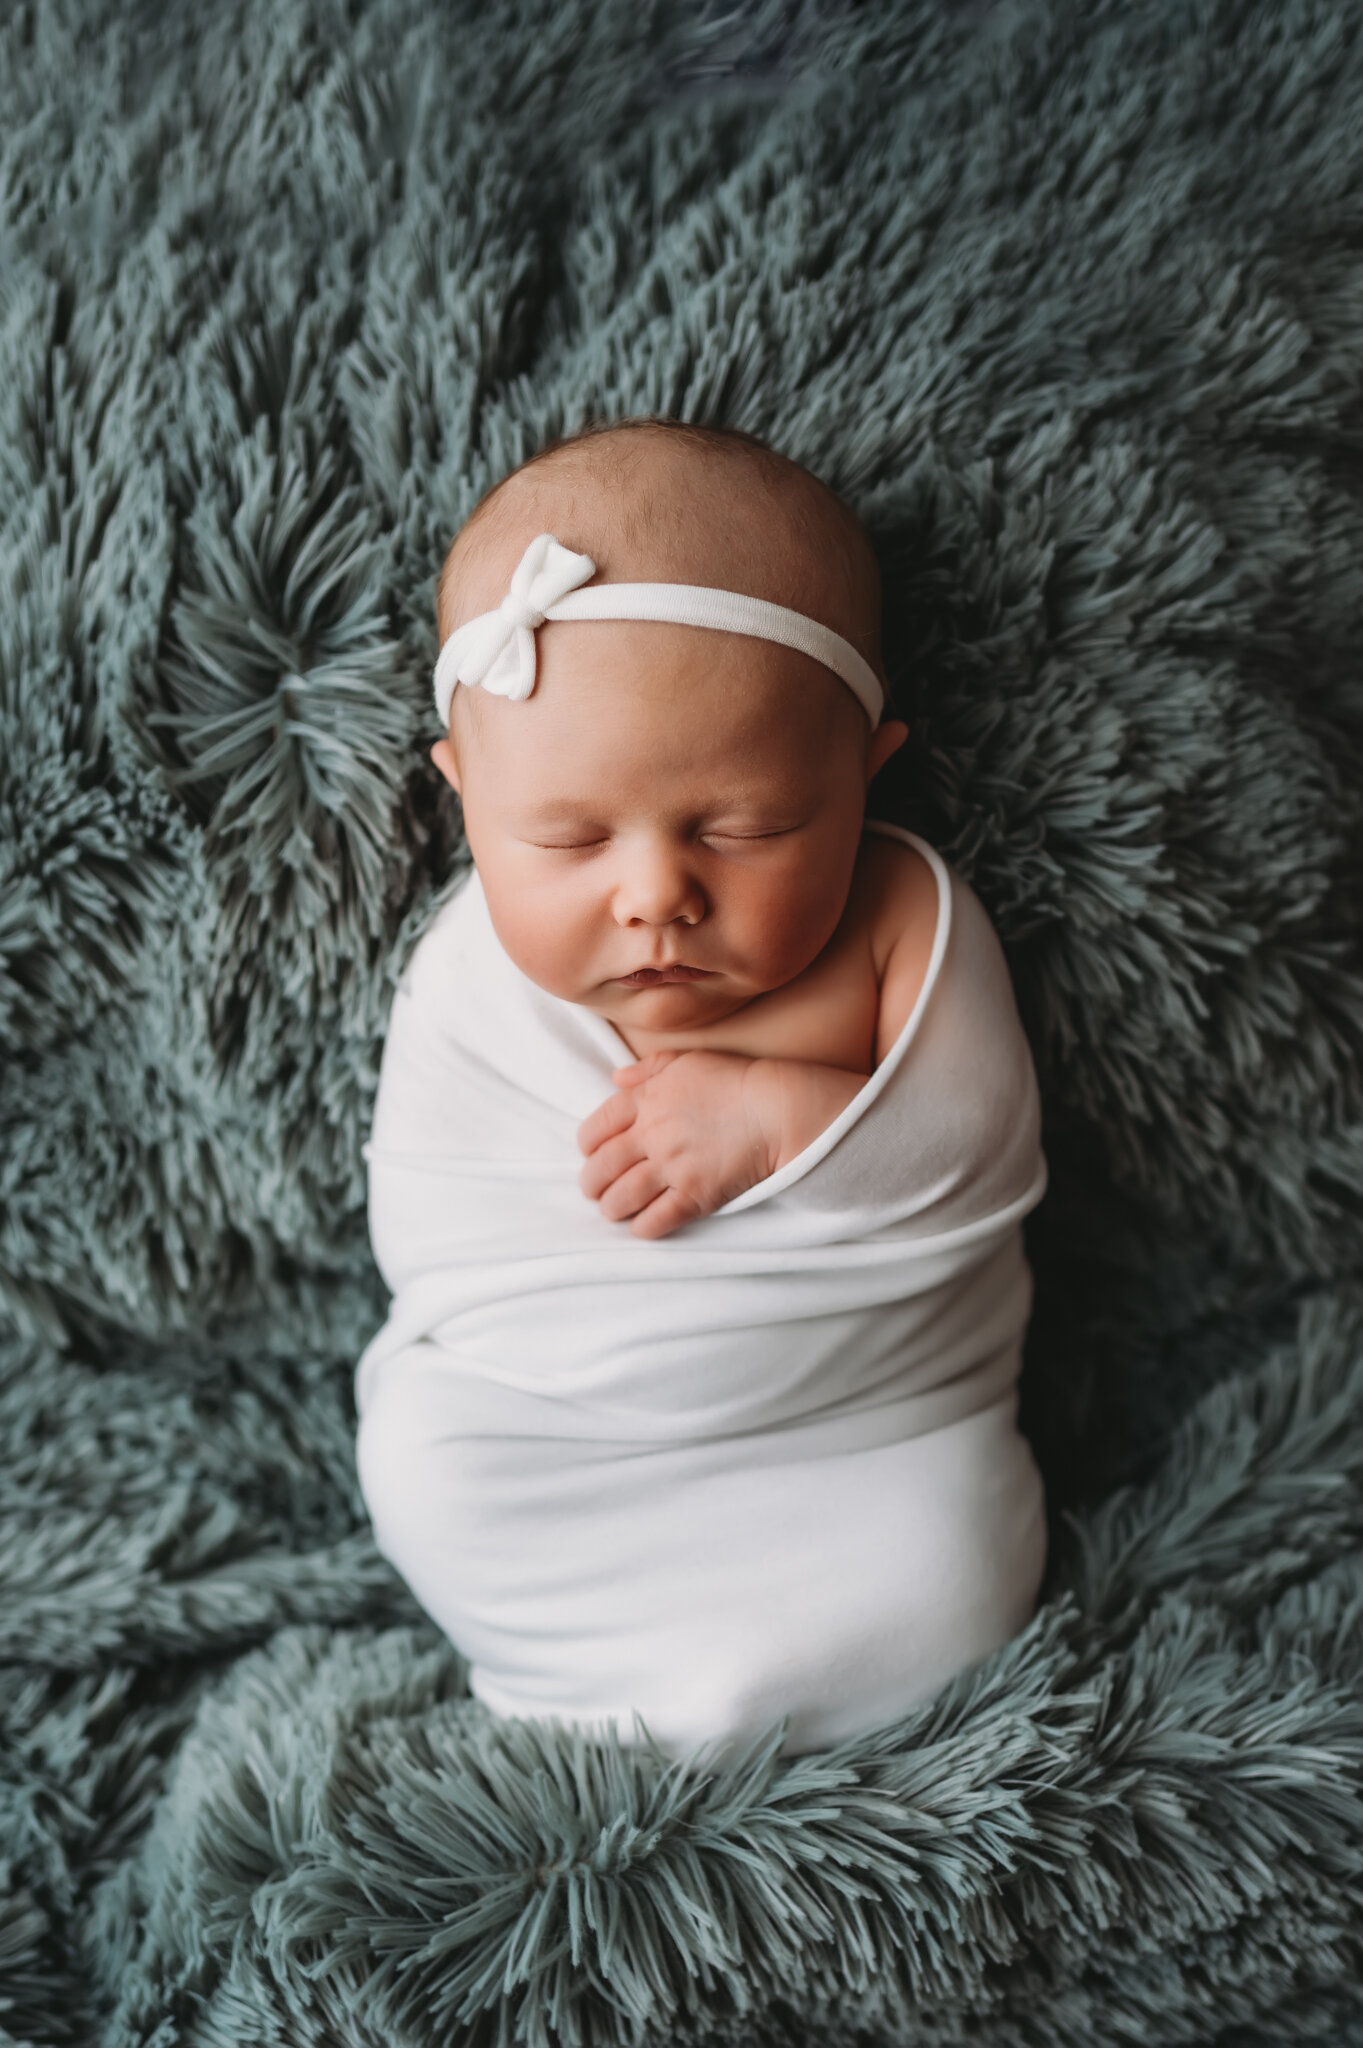 Newborn photographer in central illinois, baby girl with little white bow and white wrap